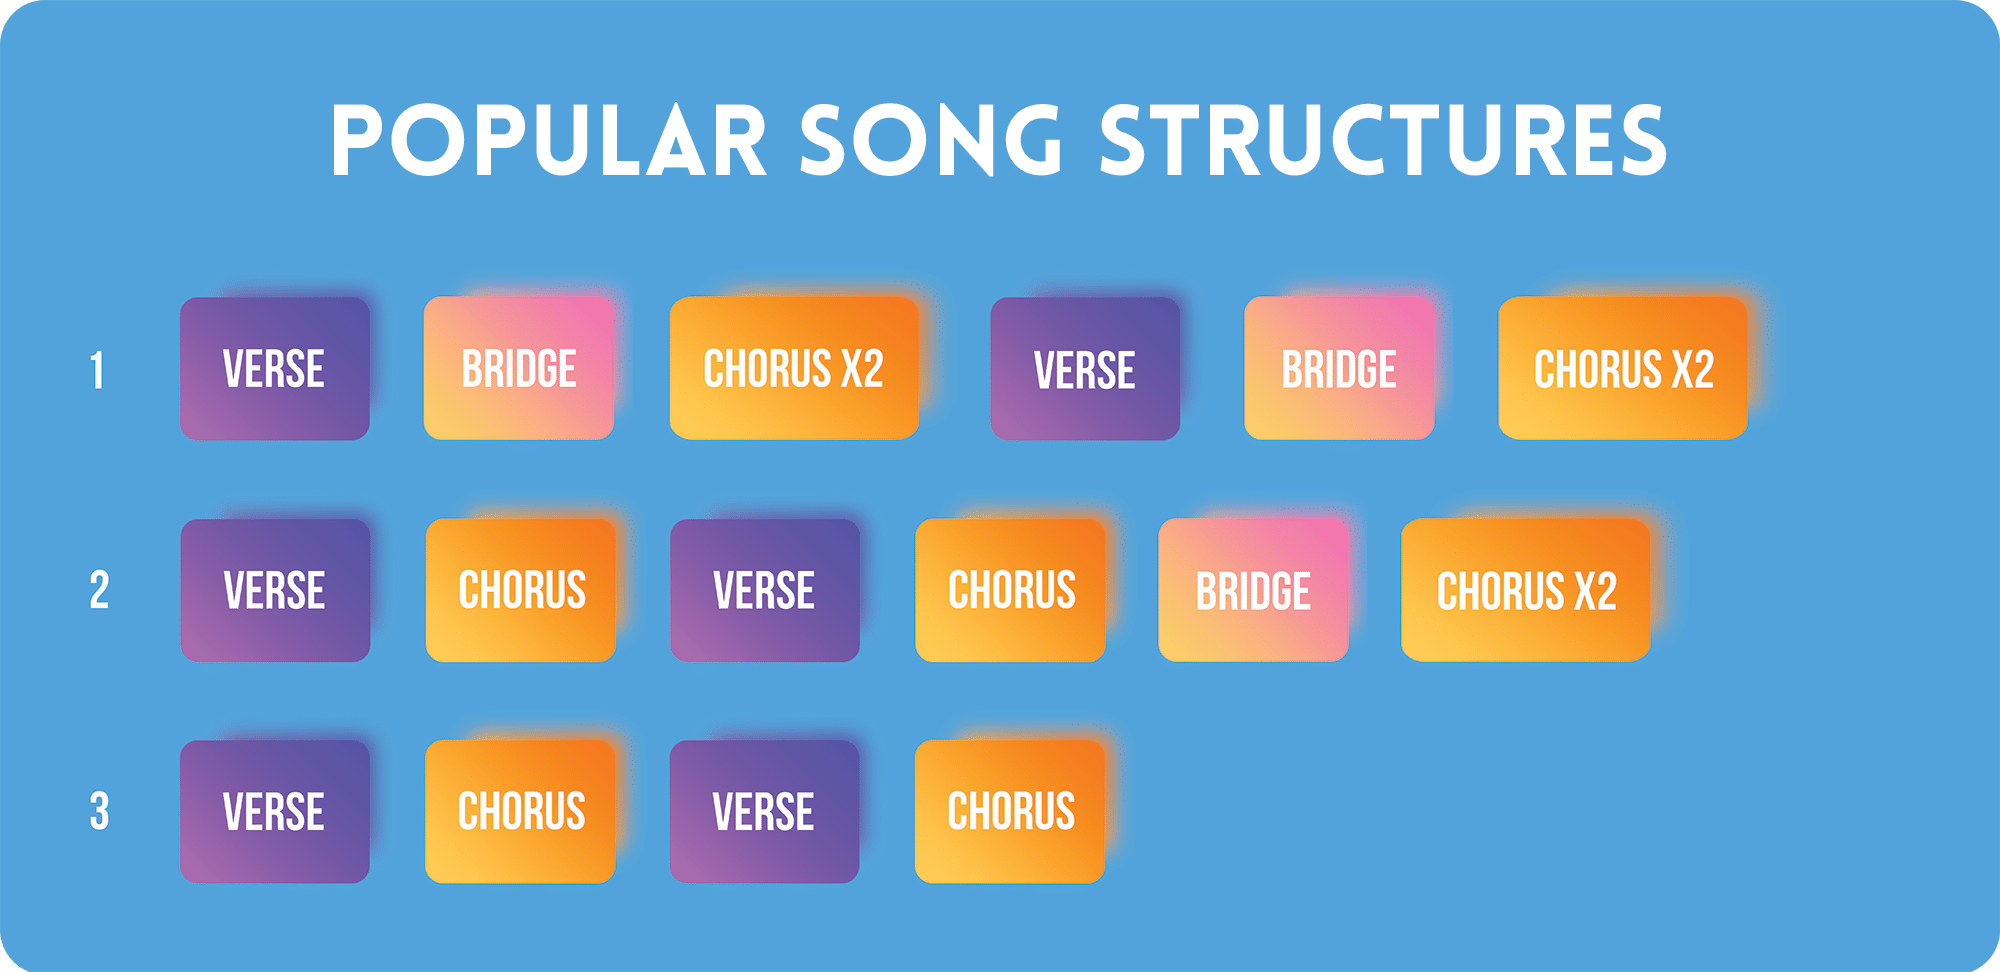 Common song structures